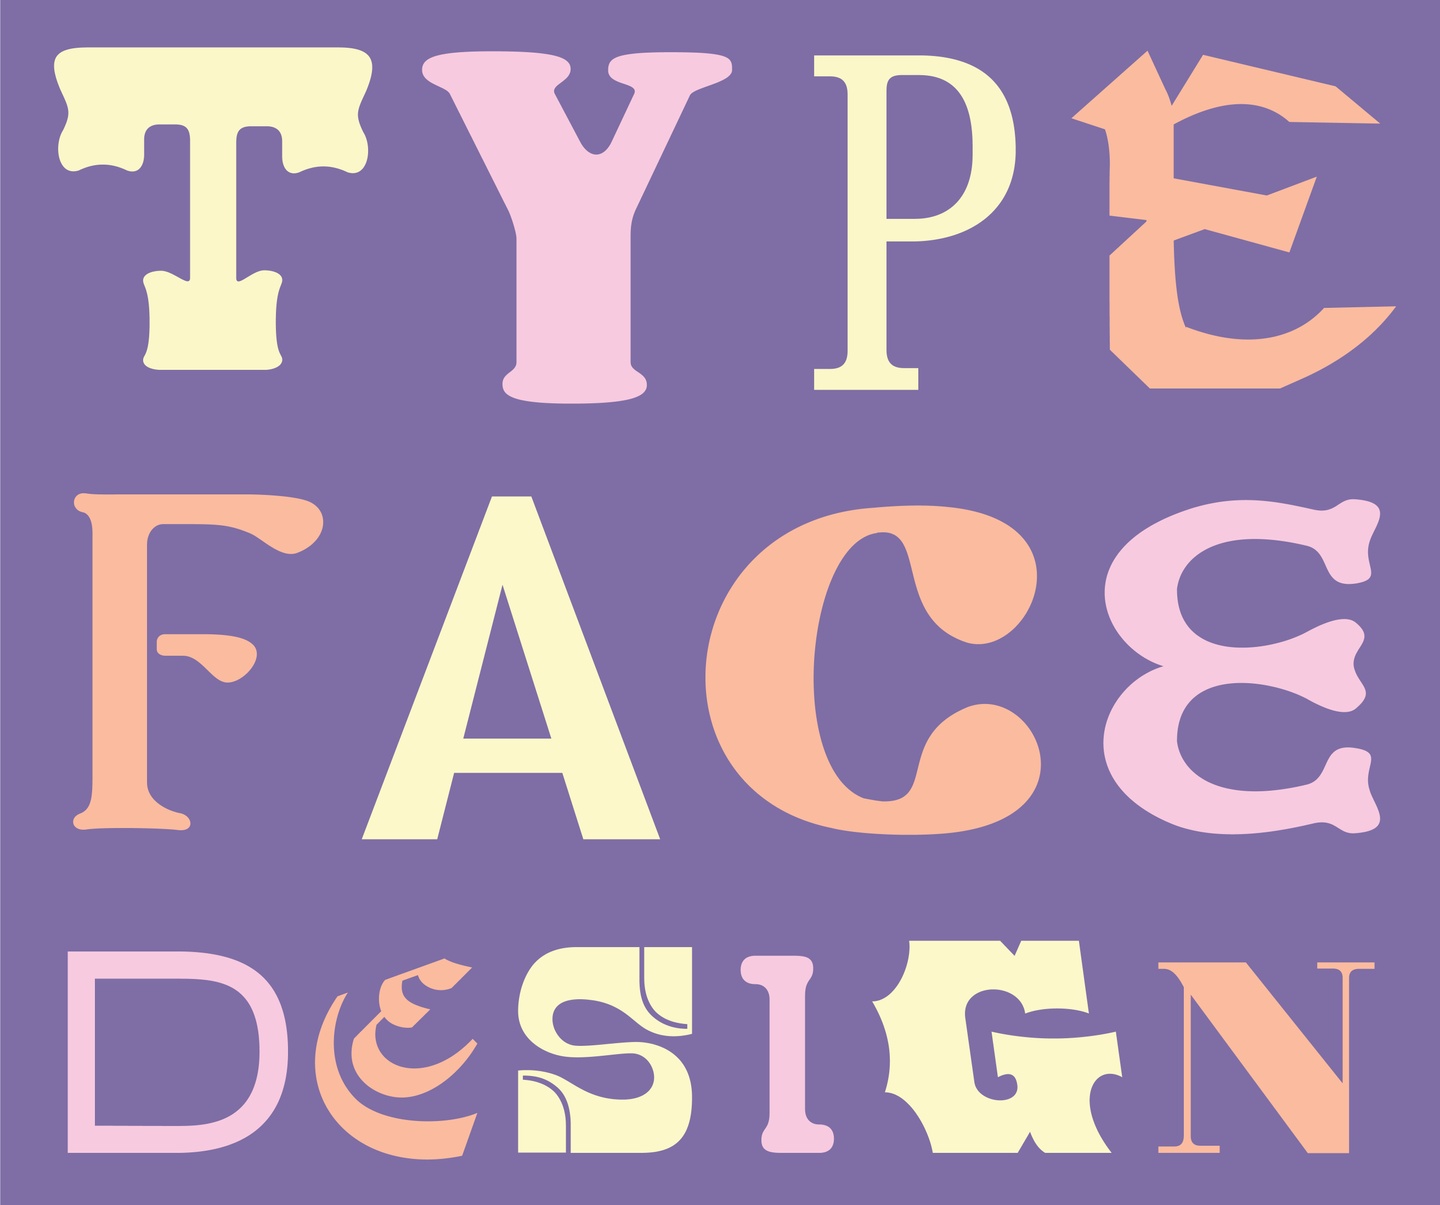 Purple background featuring different typefaces in light yellow, pink, and salmon, spelling TYPE FACE DESIGN